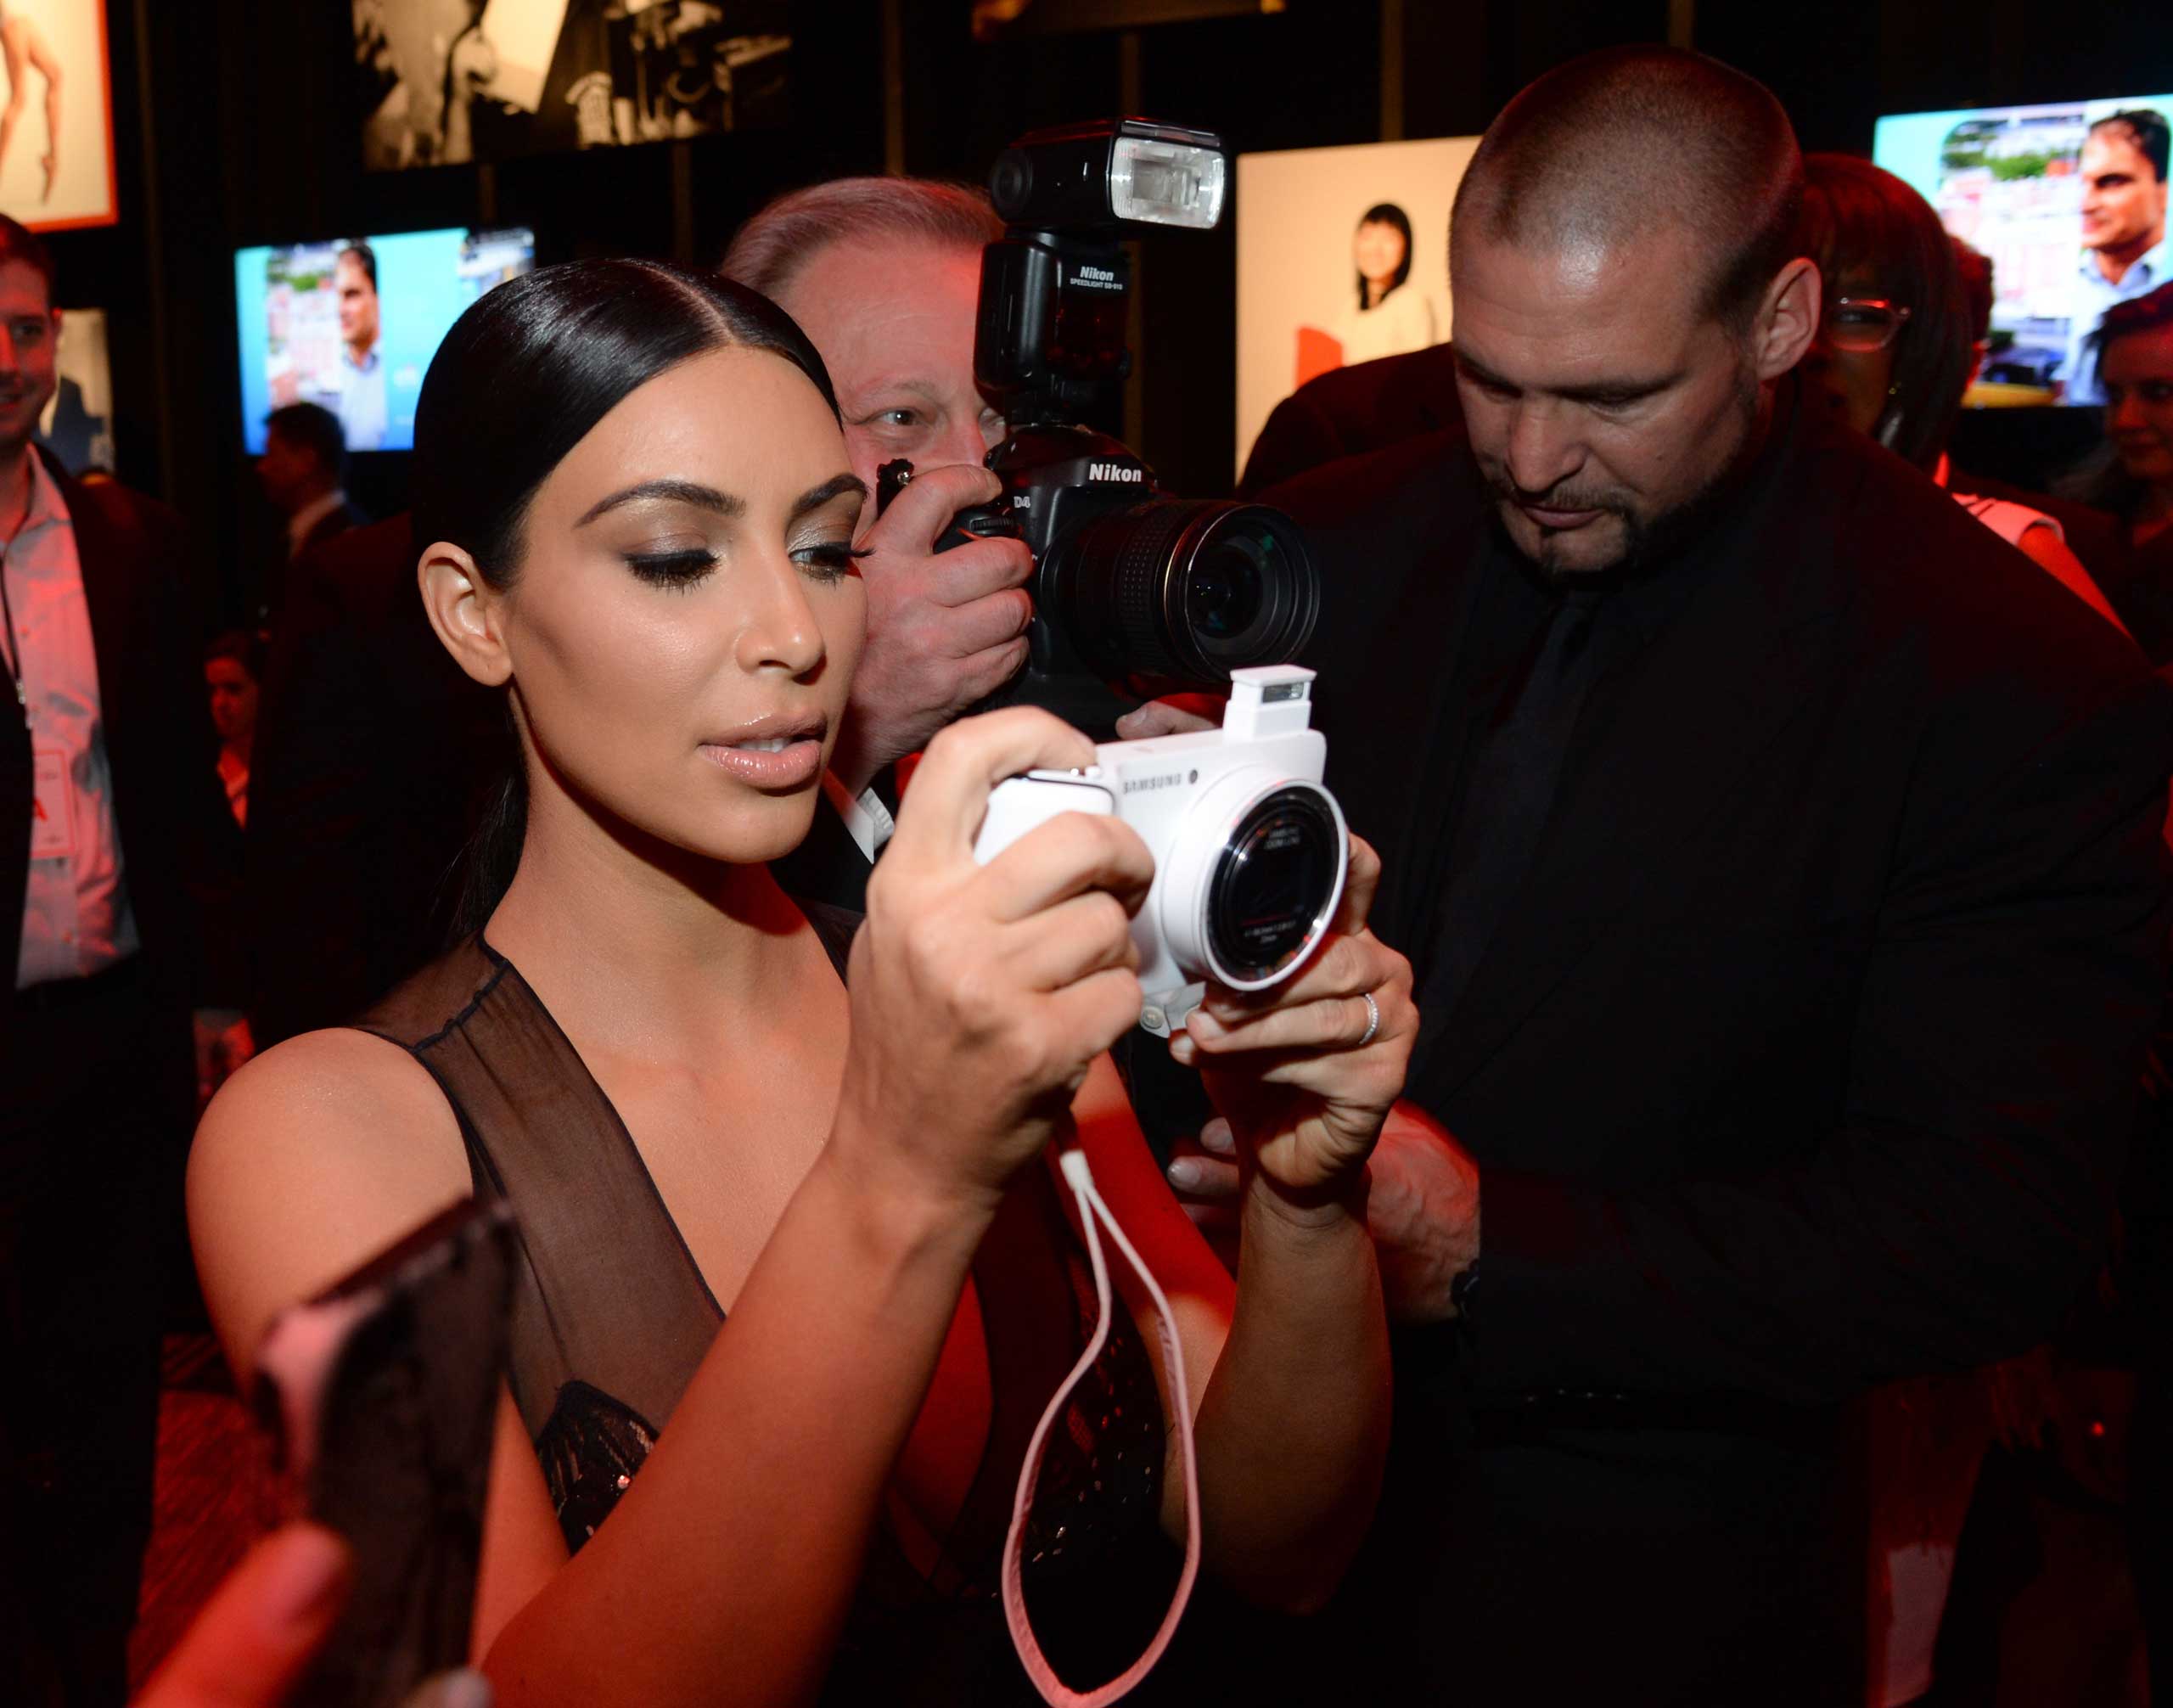 Kim Kardashian West attends the TIME 100 Gala at Jazz at Lincoln Center in New York City on Apr. 21, 2015.